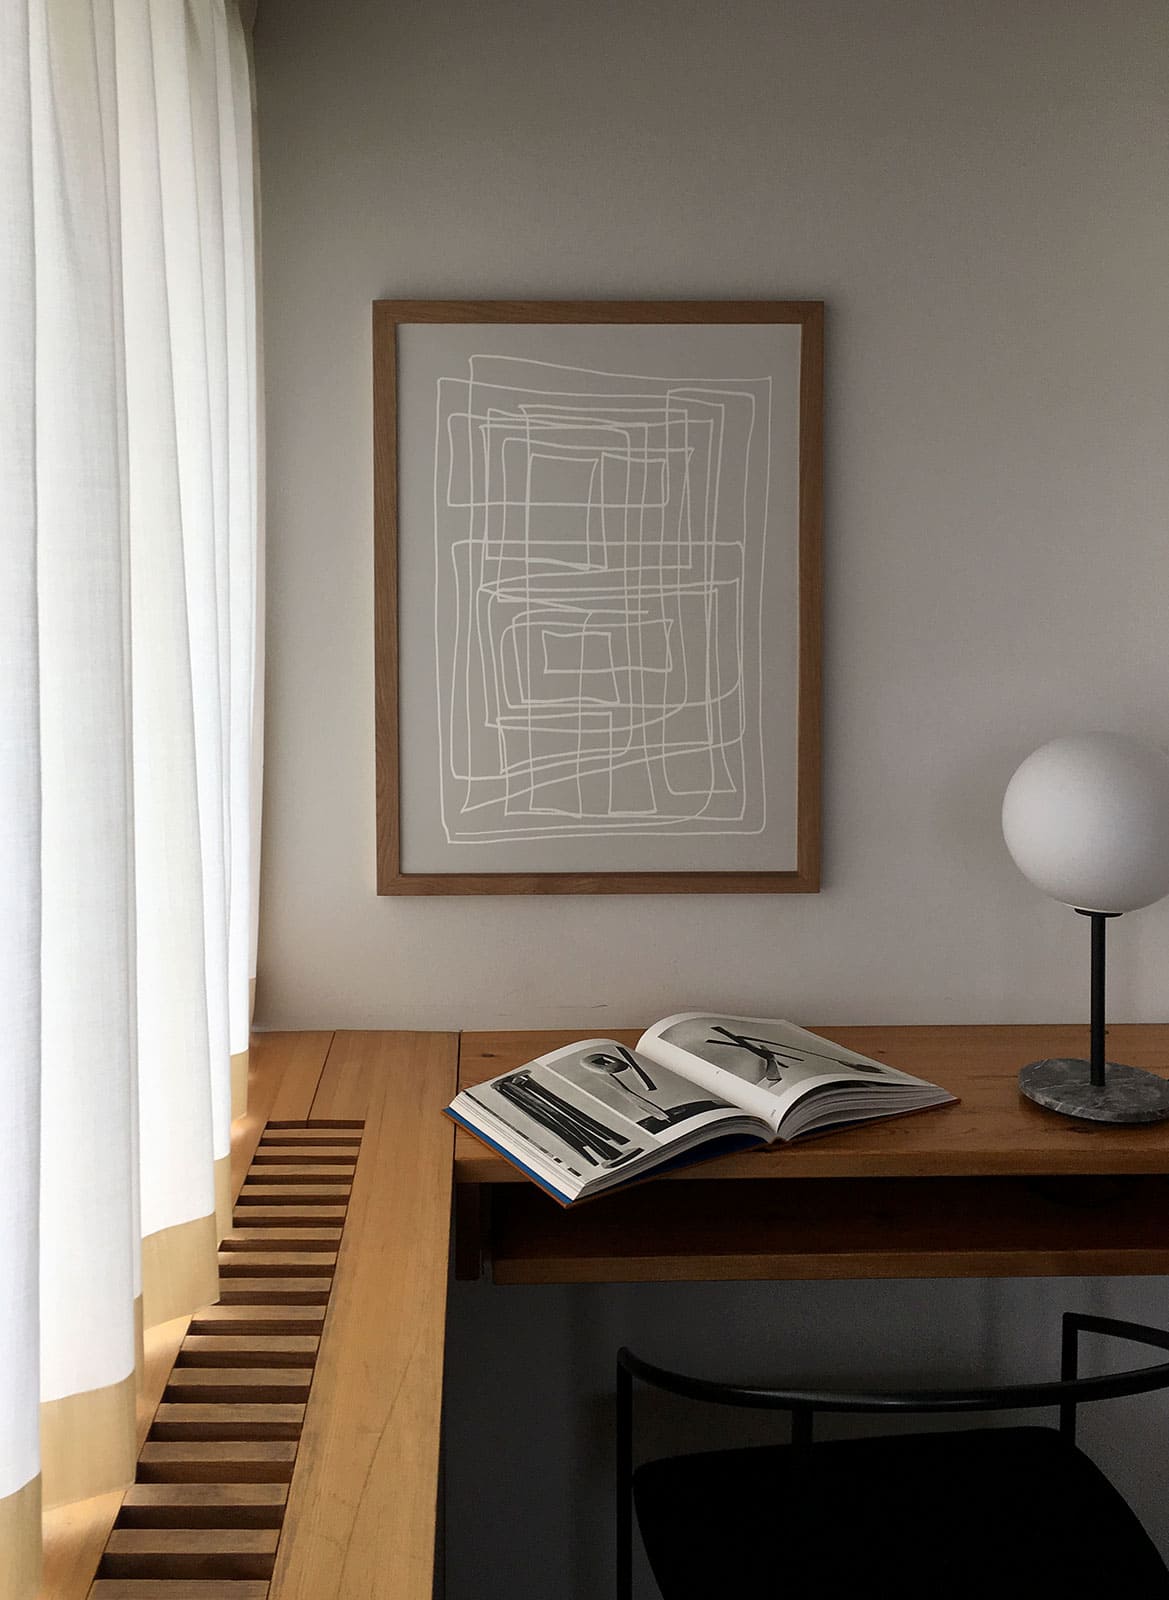   Framed minimalistic posters hanging above a desk/table by Atelier Cph